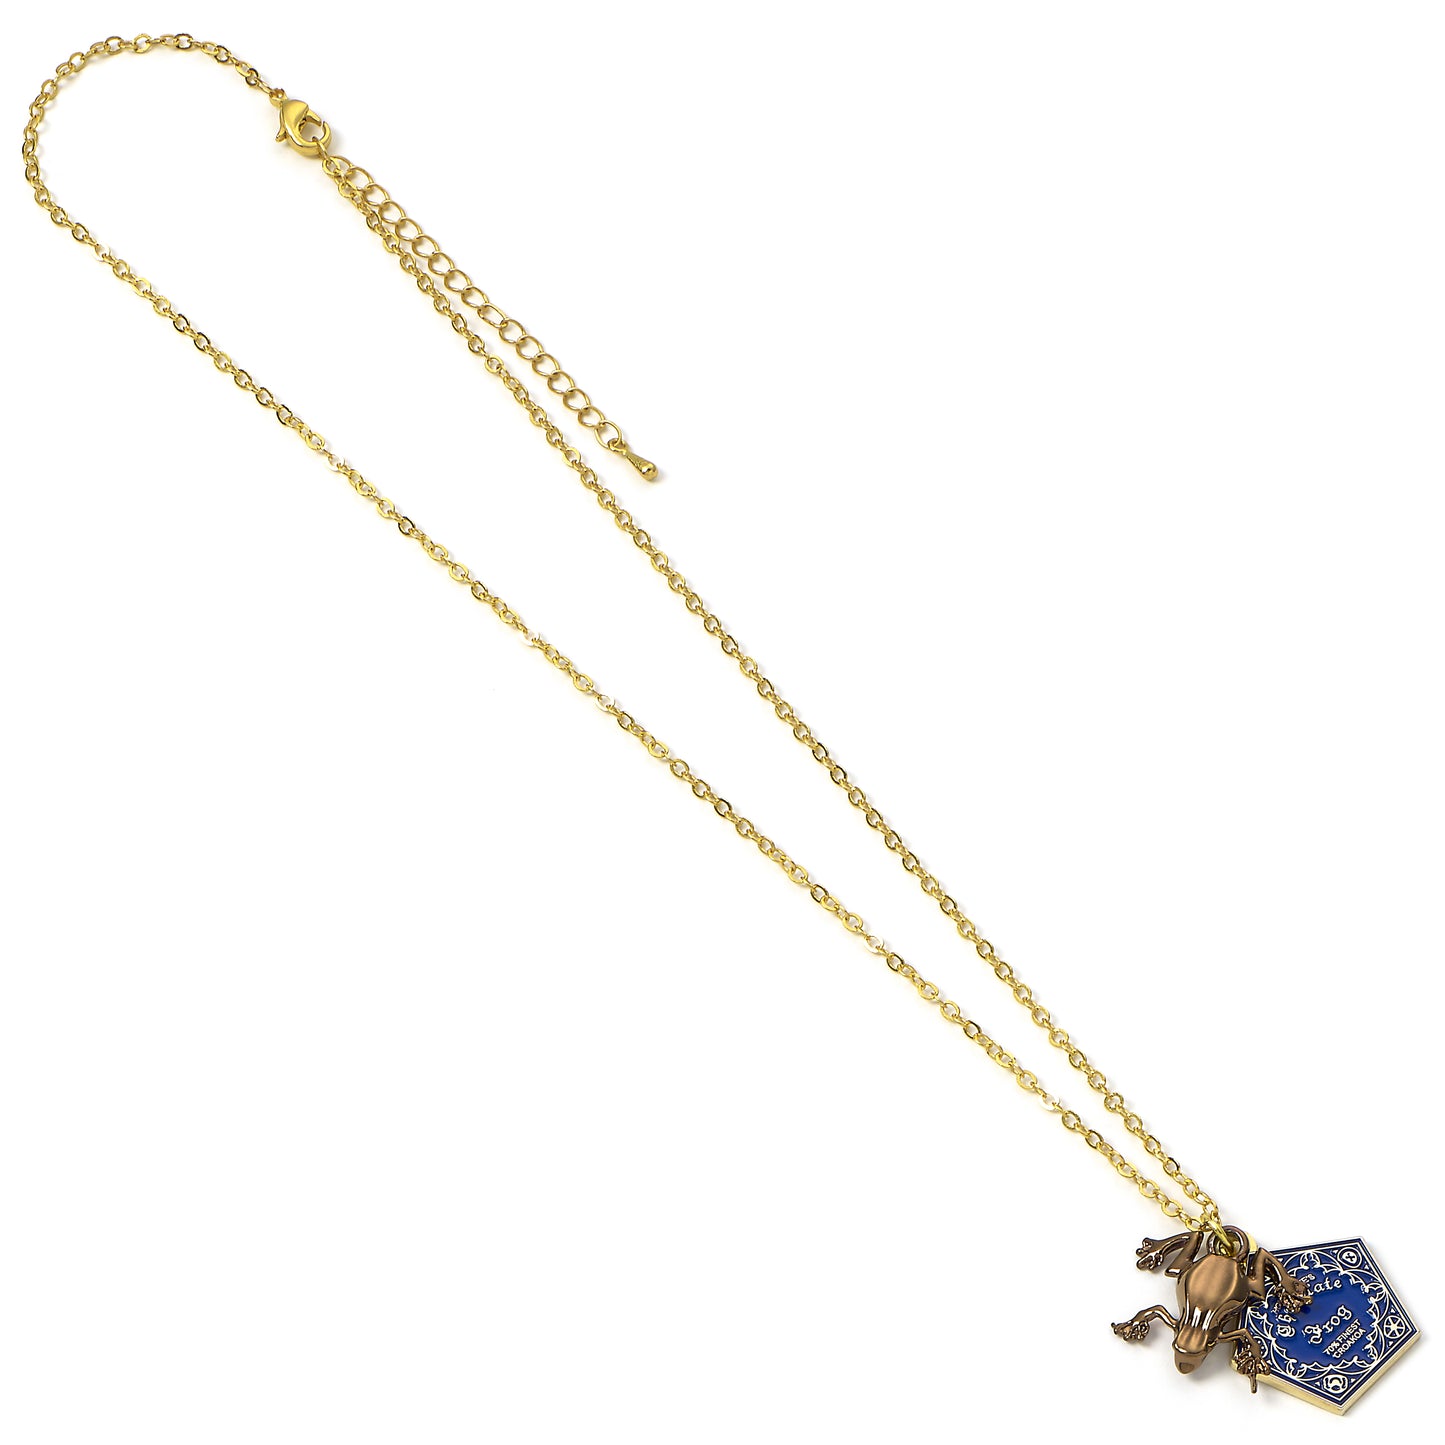 Harry Potter Chocolate Frog Necklace - Gold